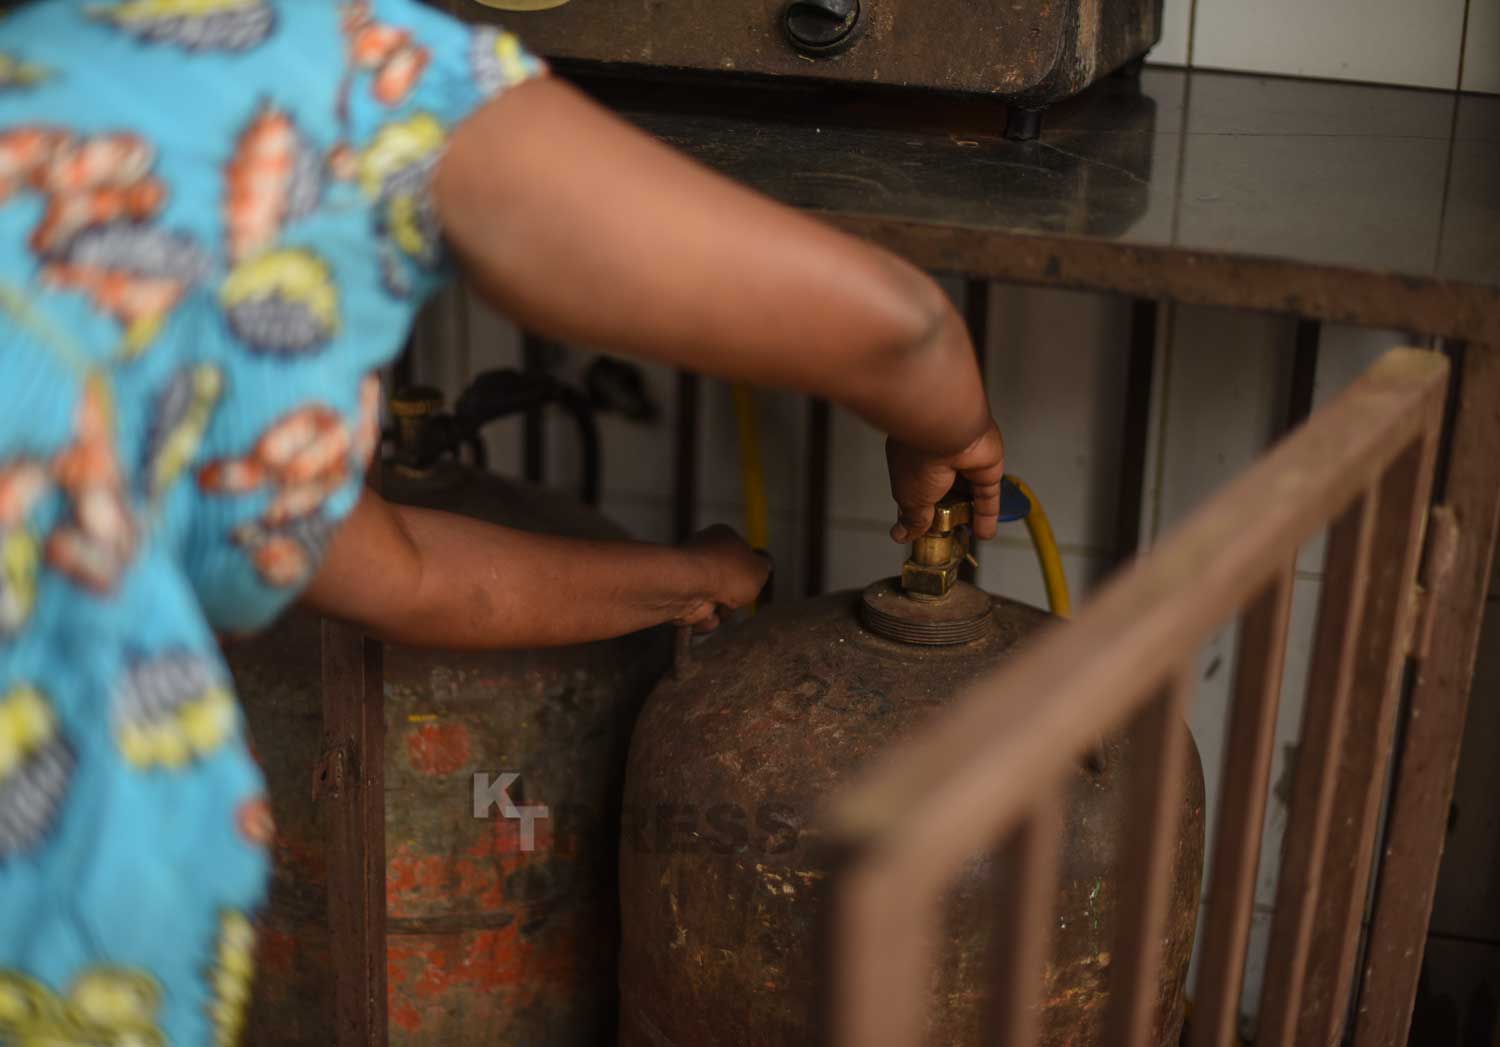 How Safe is Your Home Cooking Gas?